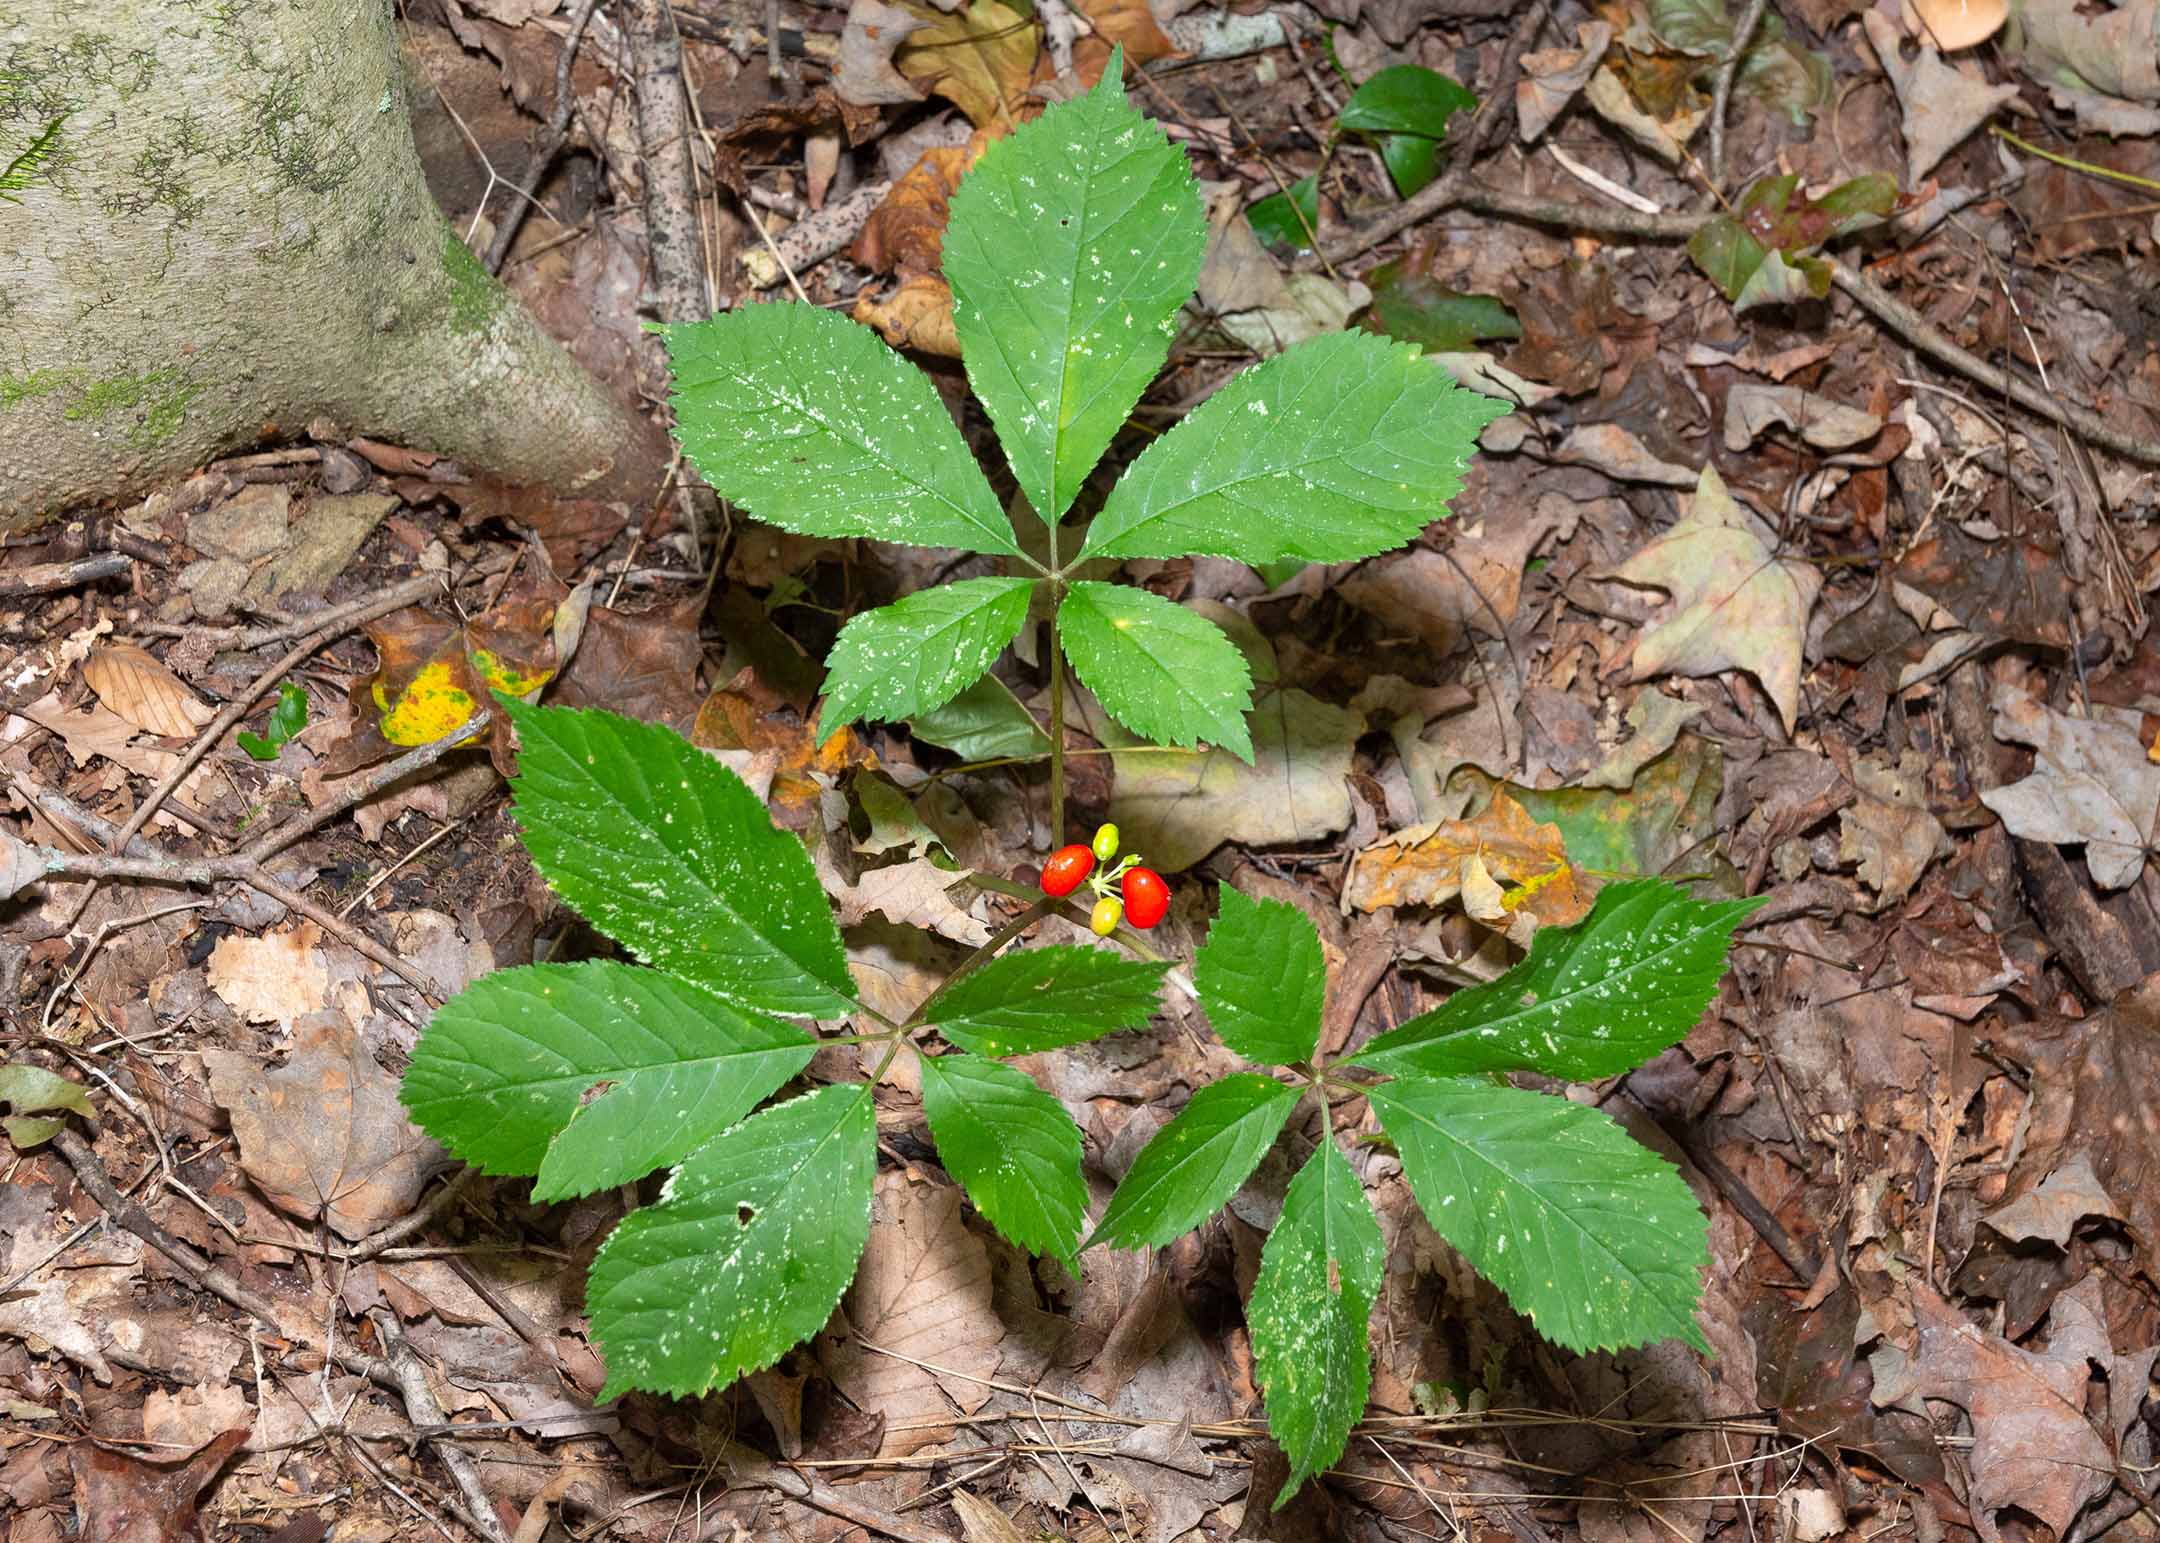 A five leafed plant with a red berry stands approximately twelve inches from the forest floor.